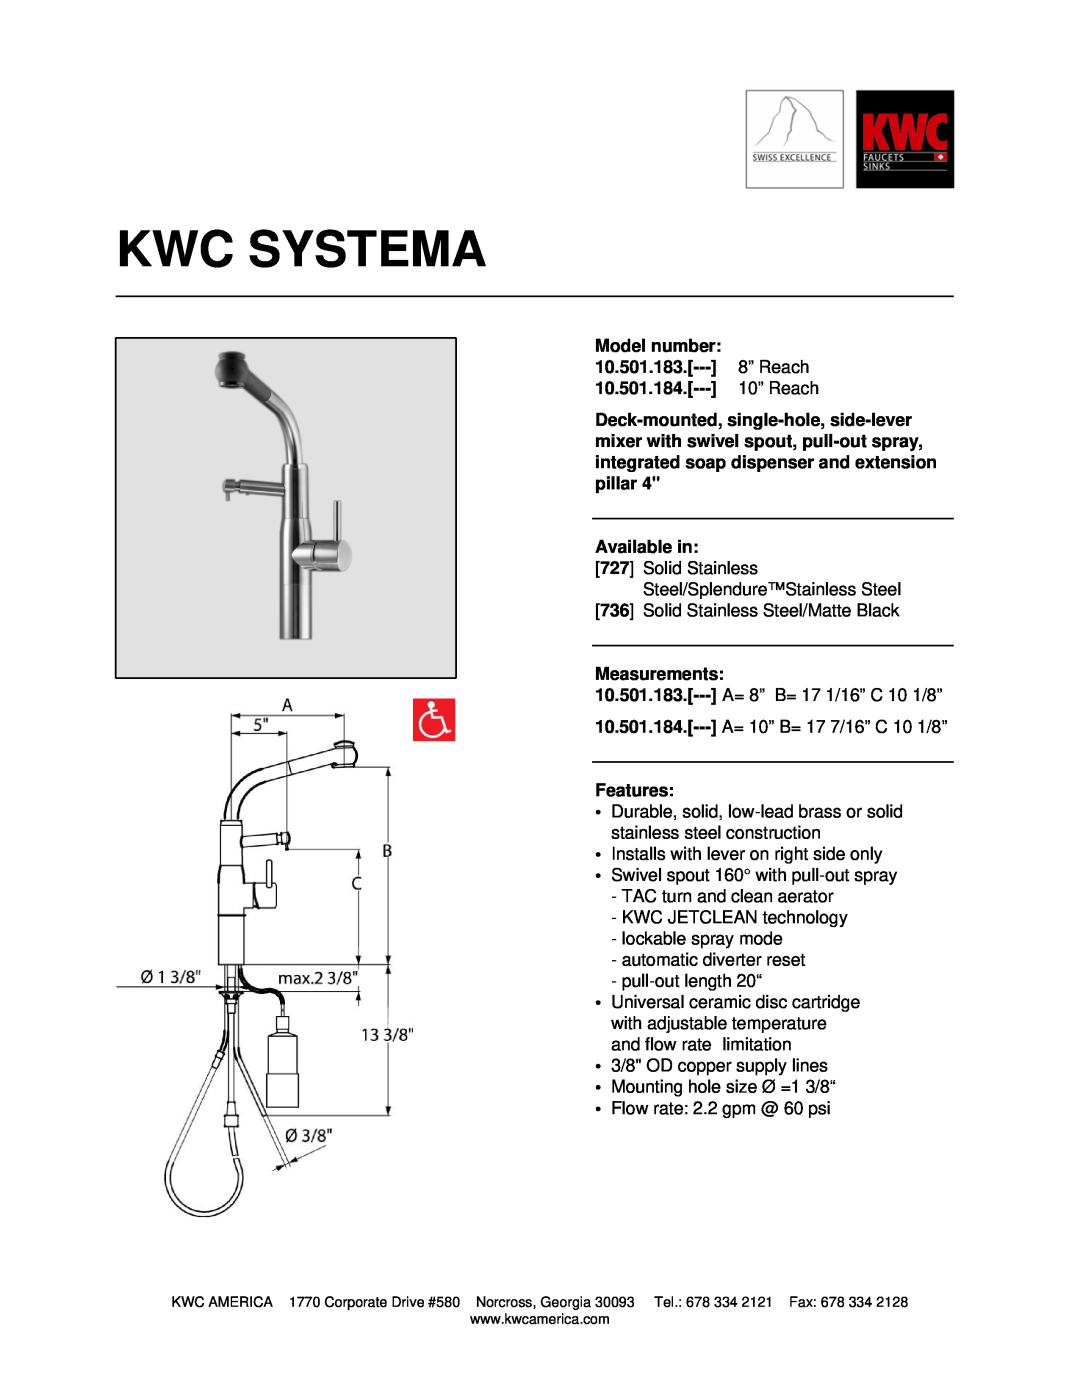 KWC 10.501.184 manual Kwc Systema, Model number, 10.501.183, 8” Reach, 10” Reach, Available in, Measurements, Features 